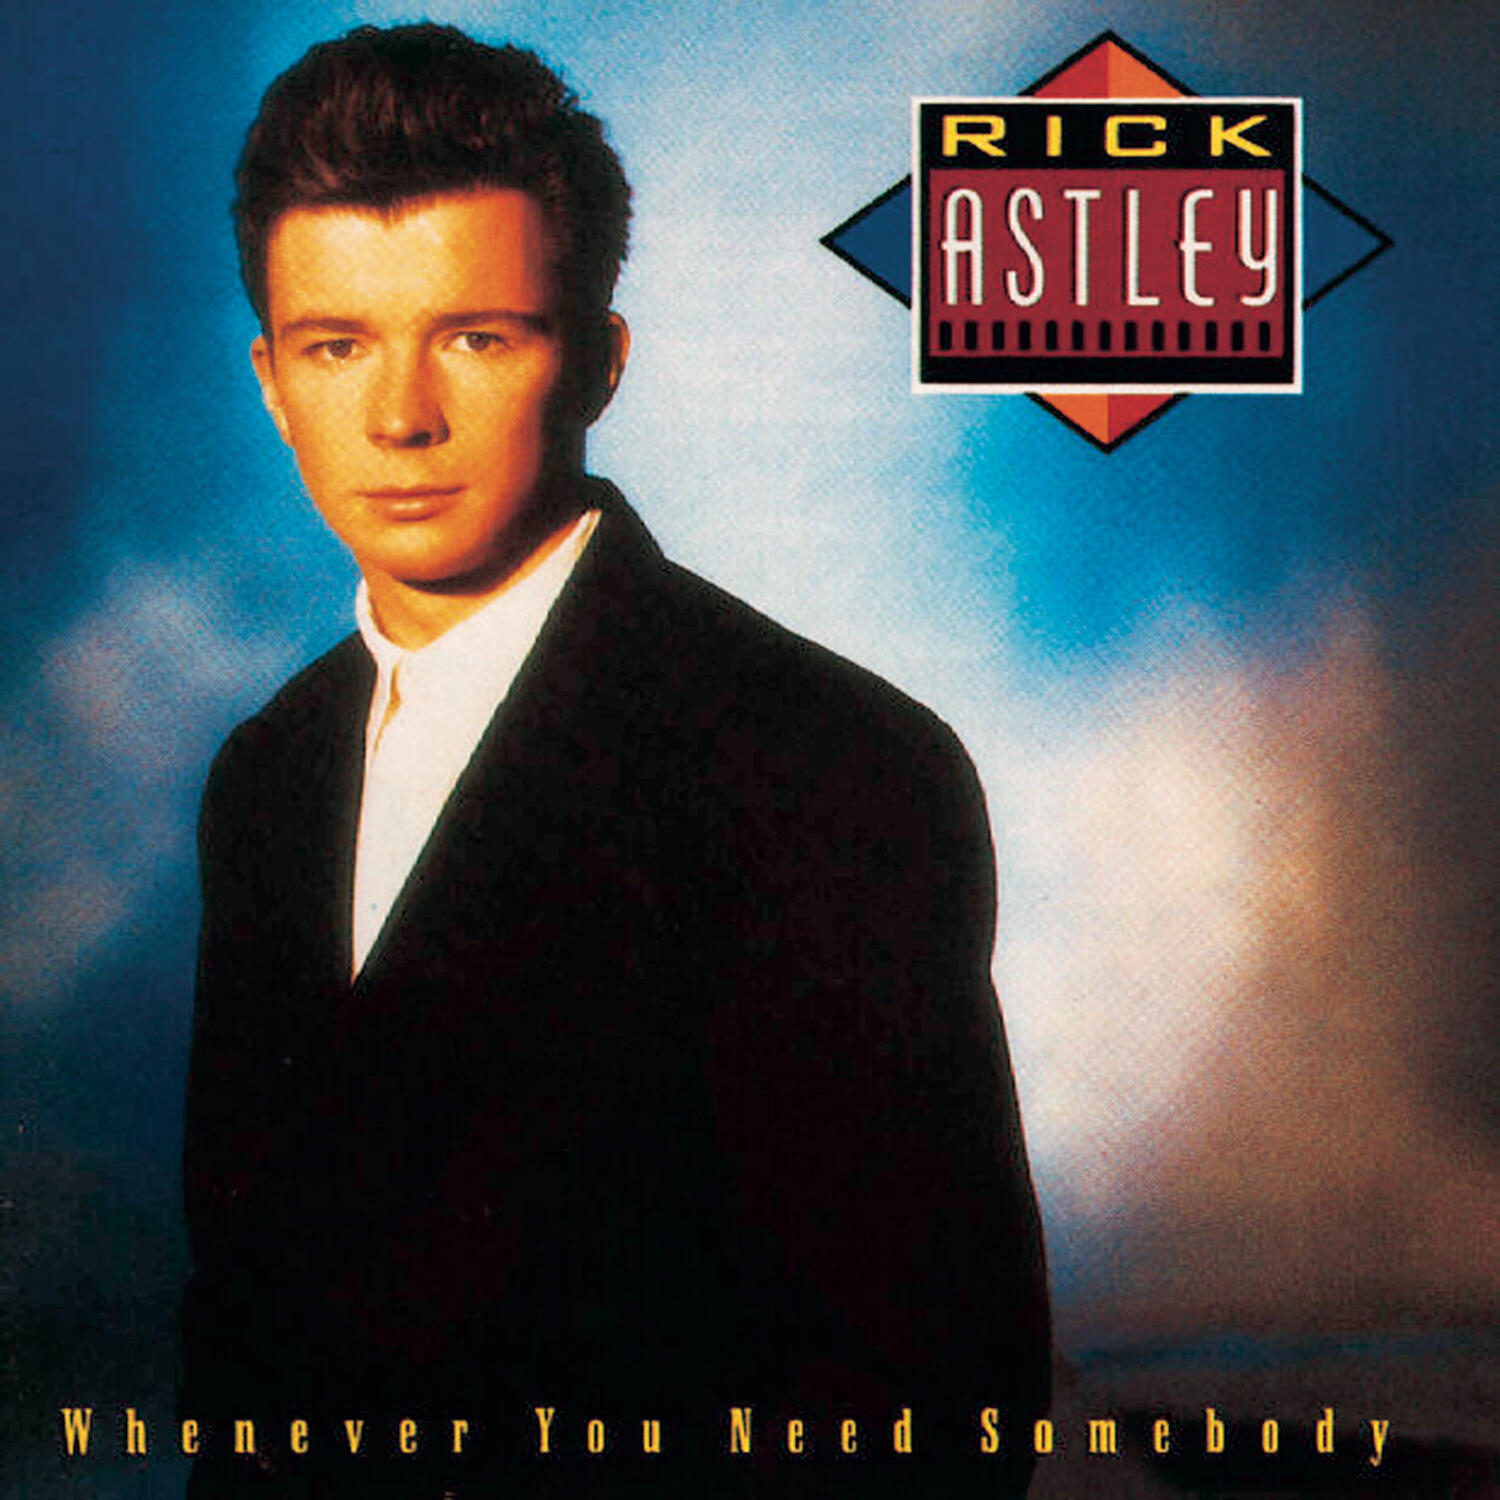 Rick Astley - Whenever You Need Somebody | iHeart